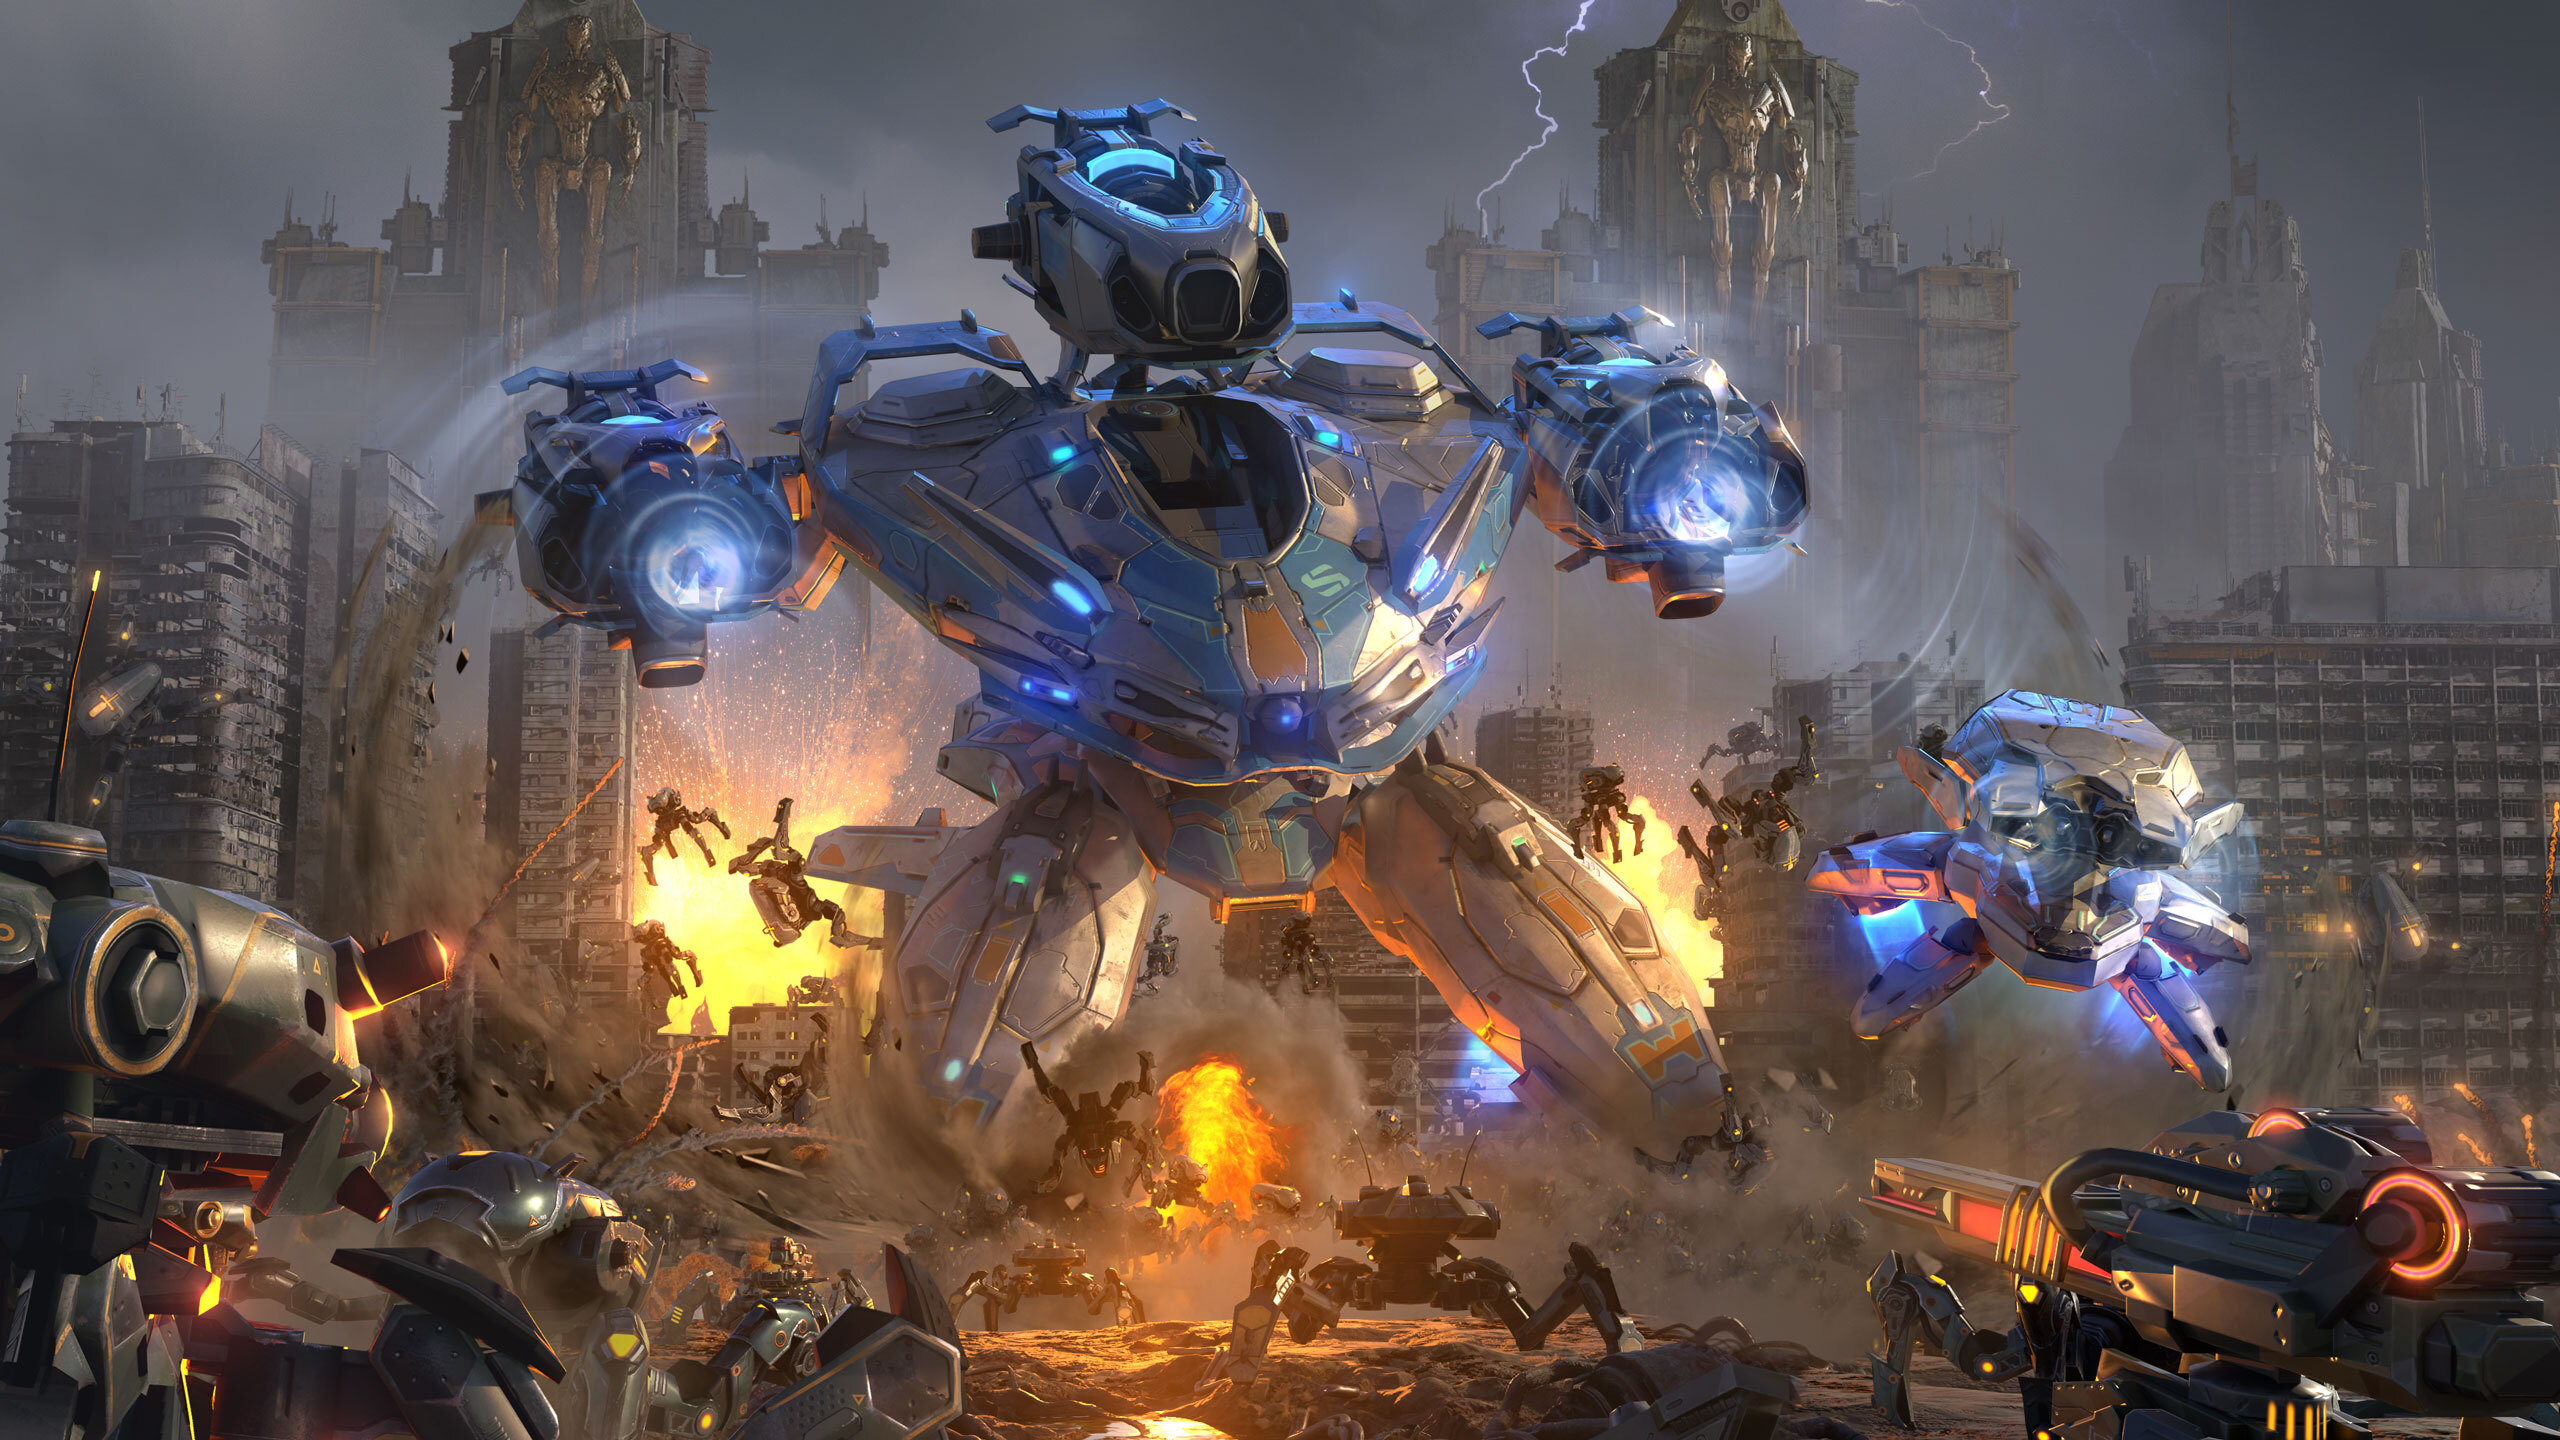 It's official: War Robots is more than just one game - Pixonic